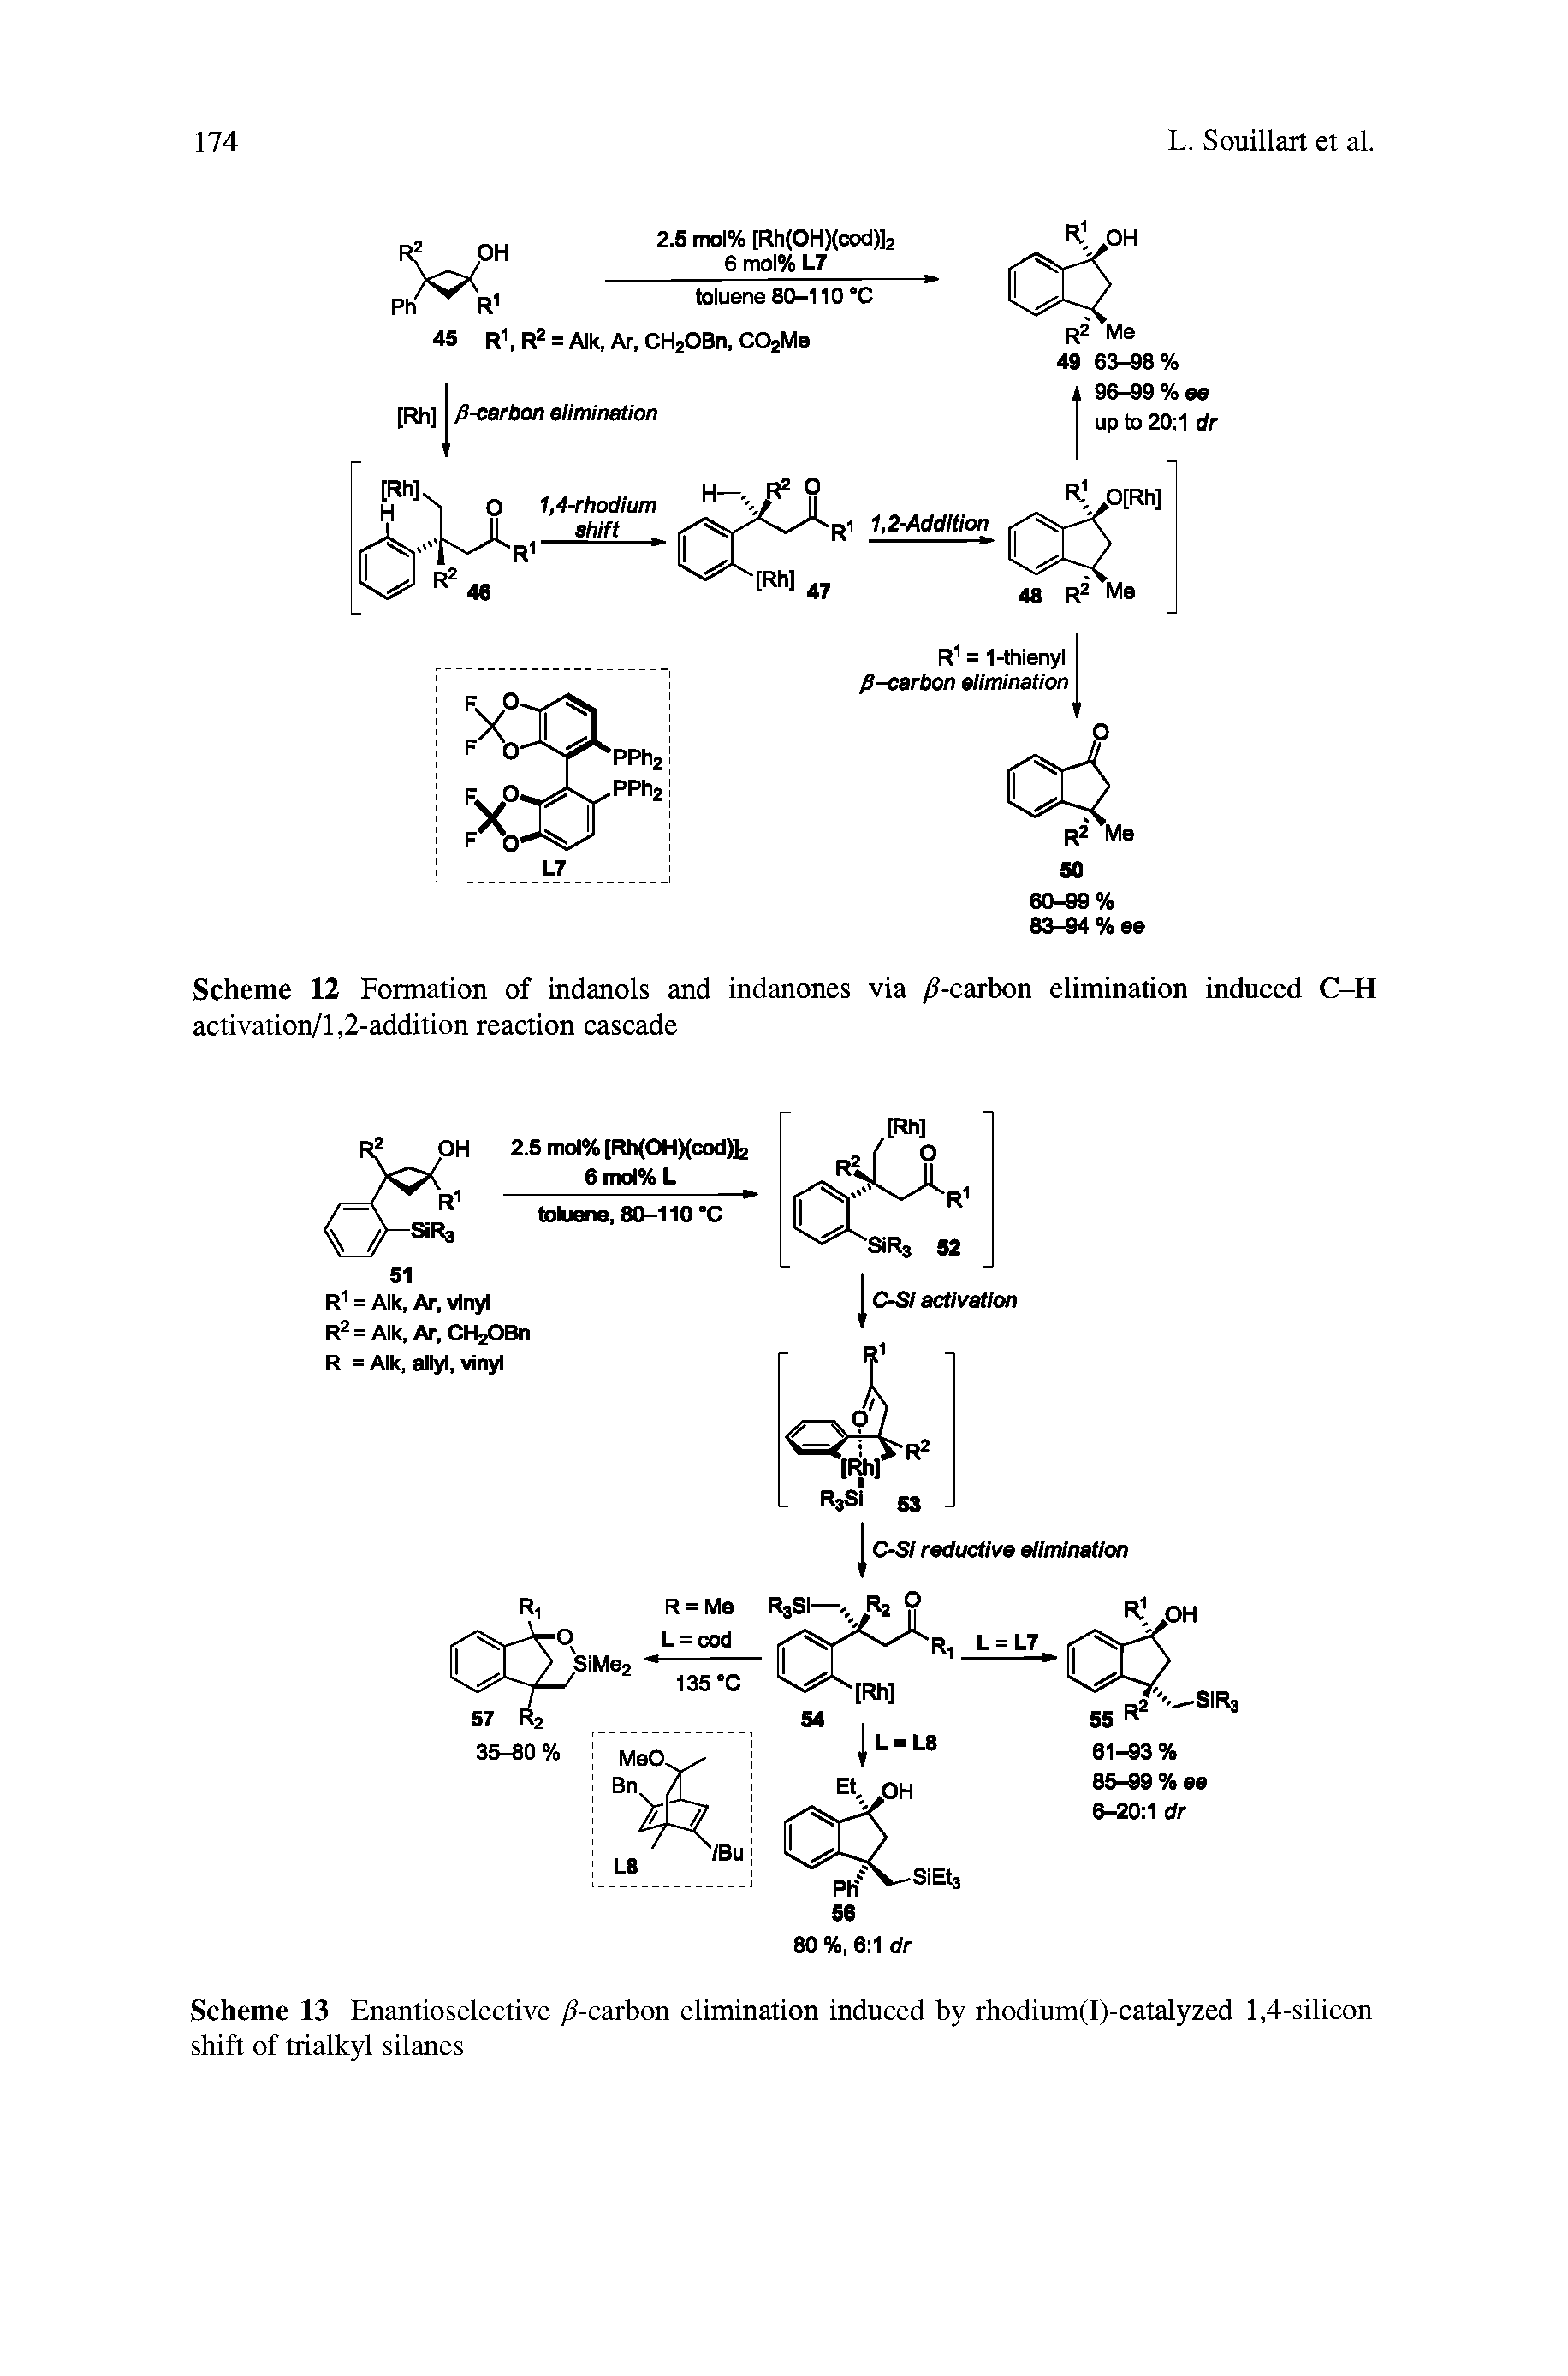 Scheme 13 Enantioselective -carbon elimination induced by rhodium(I)-catalyzed 1,4-silicon shift of trialkyl silanes...